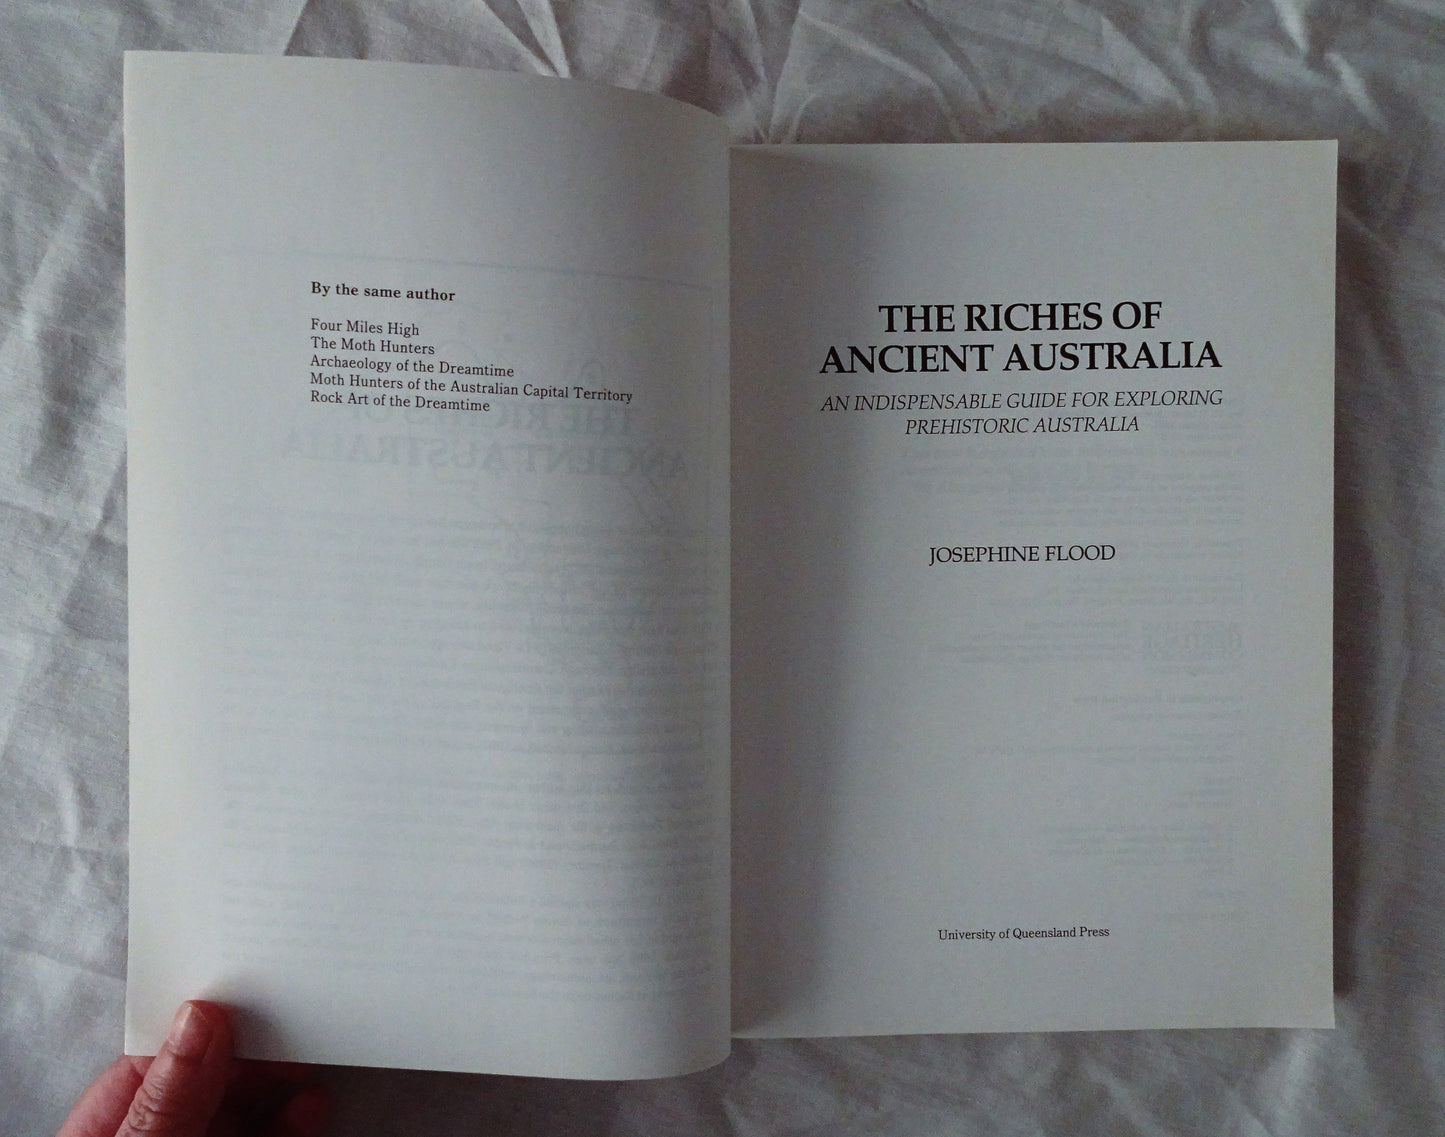 The Riches of Ancient Australia by Josephine Flood